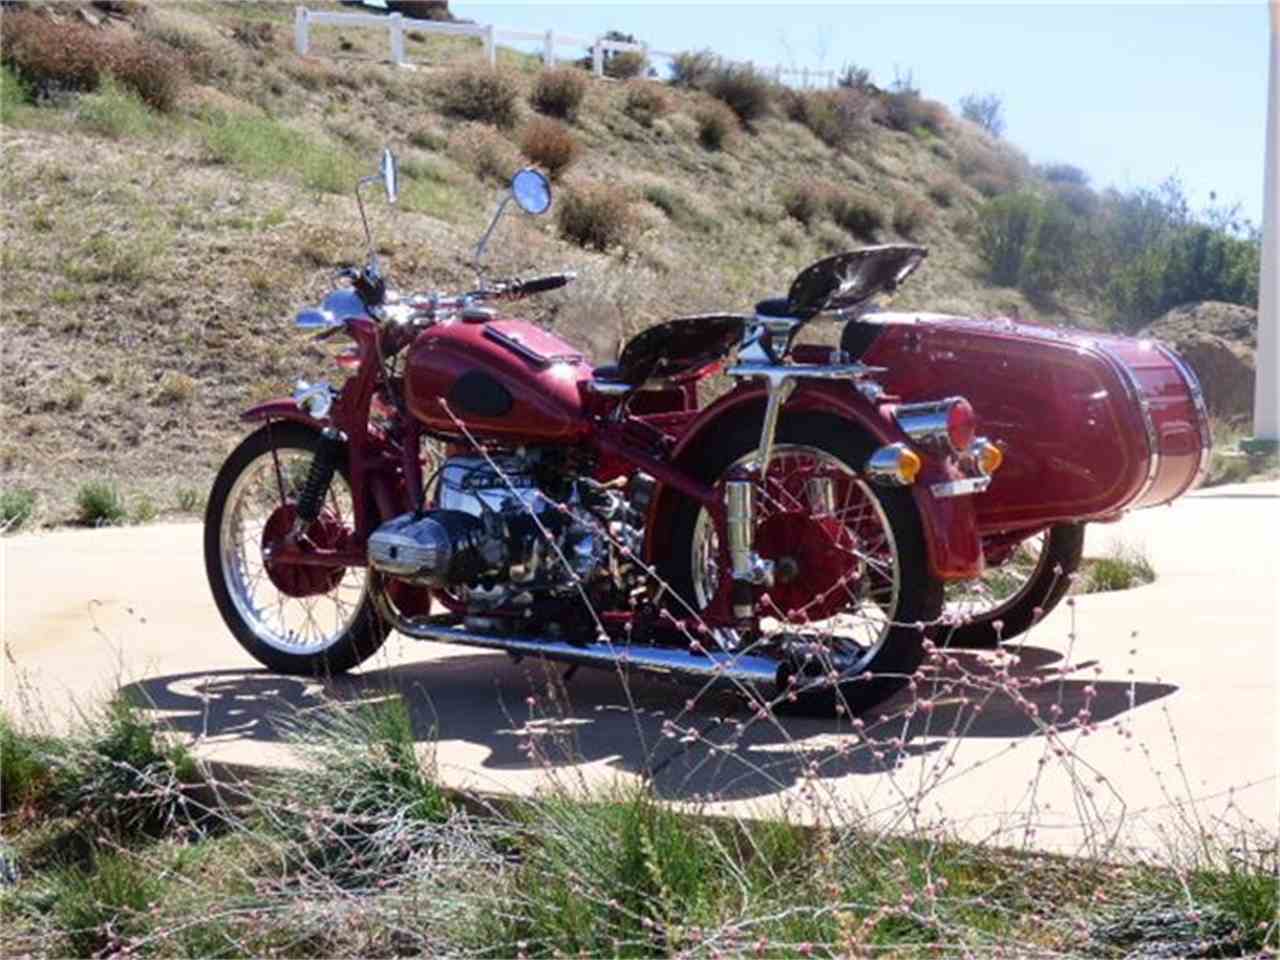 Three-wheelers are popular, but vintage motorcycles with sidecars are cool